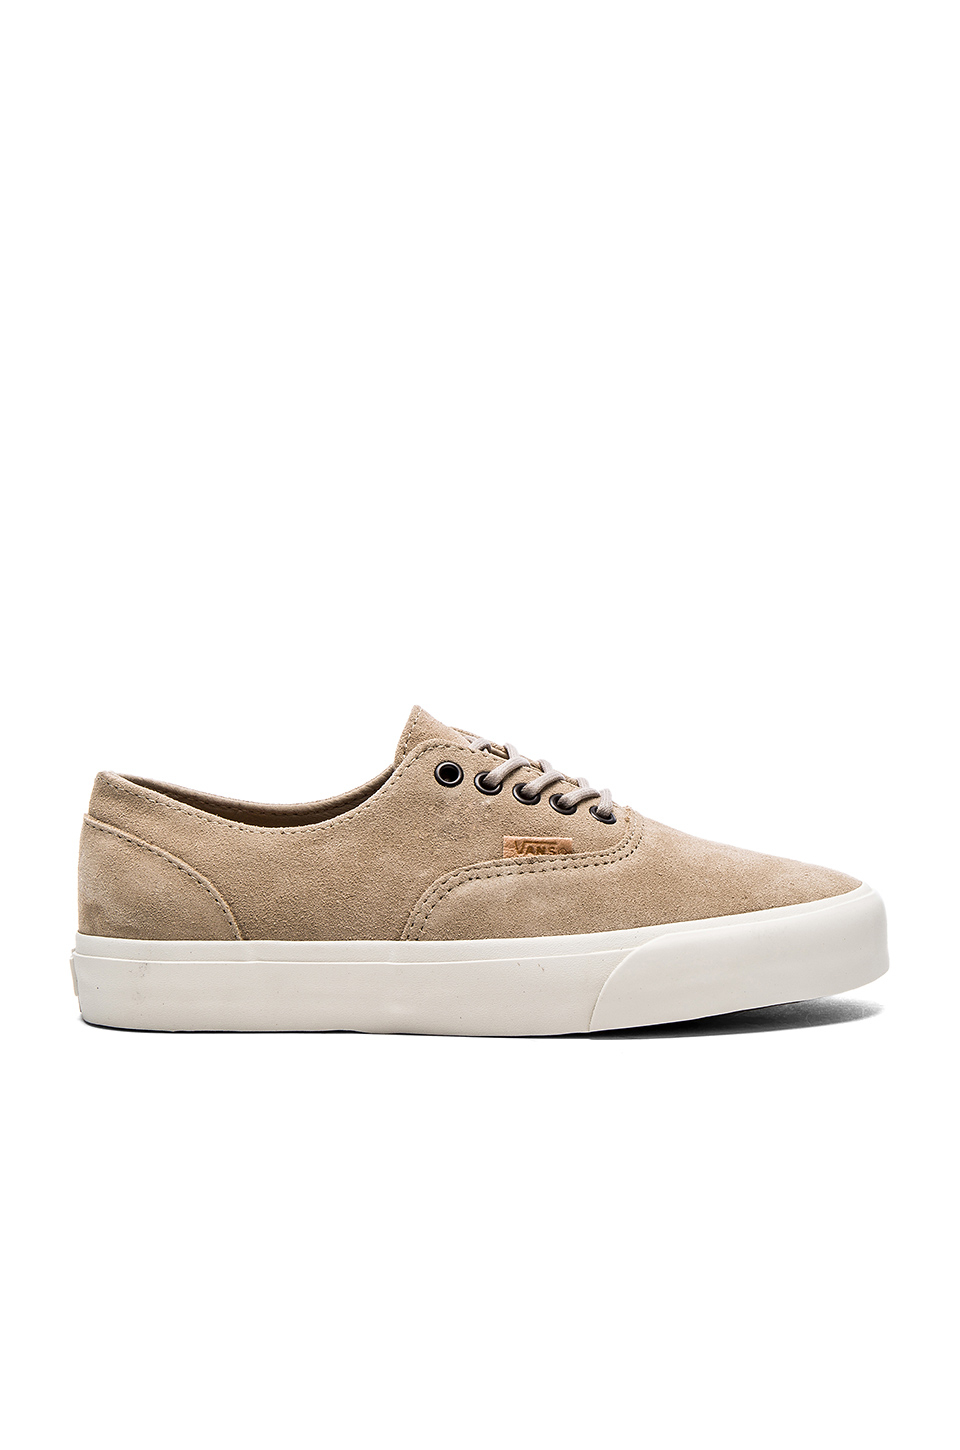 California Decon Suede in Natural for - Lyst